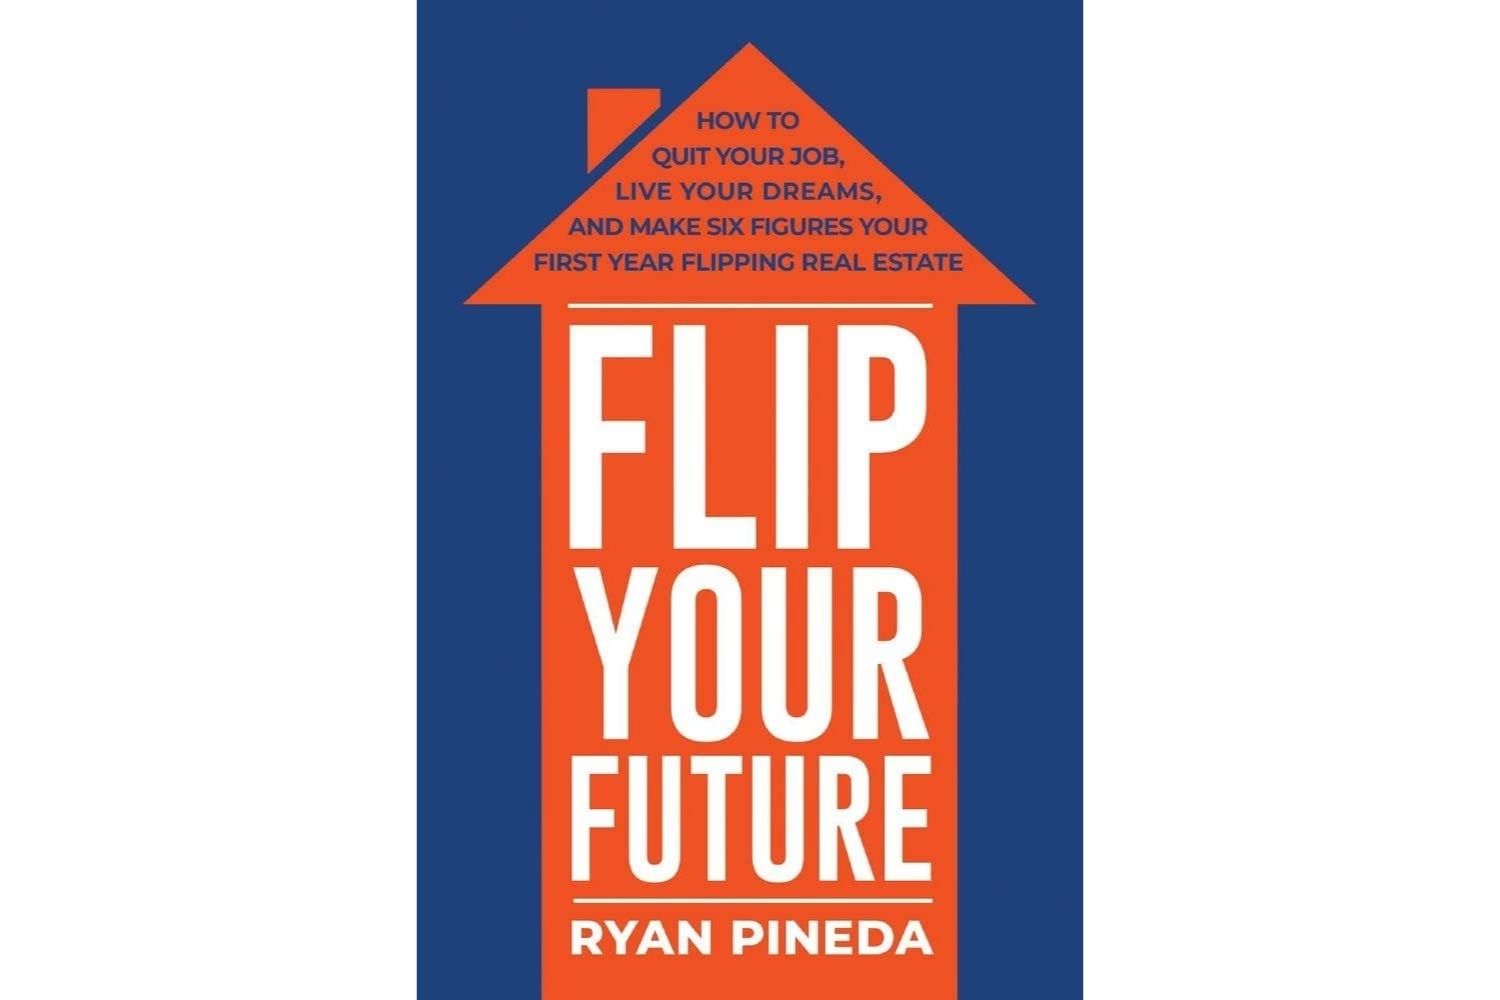 The Best Real Estate Books Options: Flip Your Future